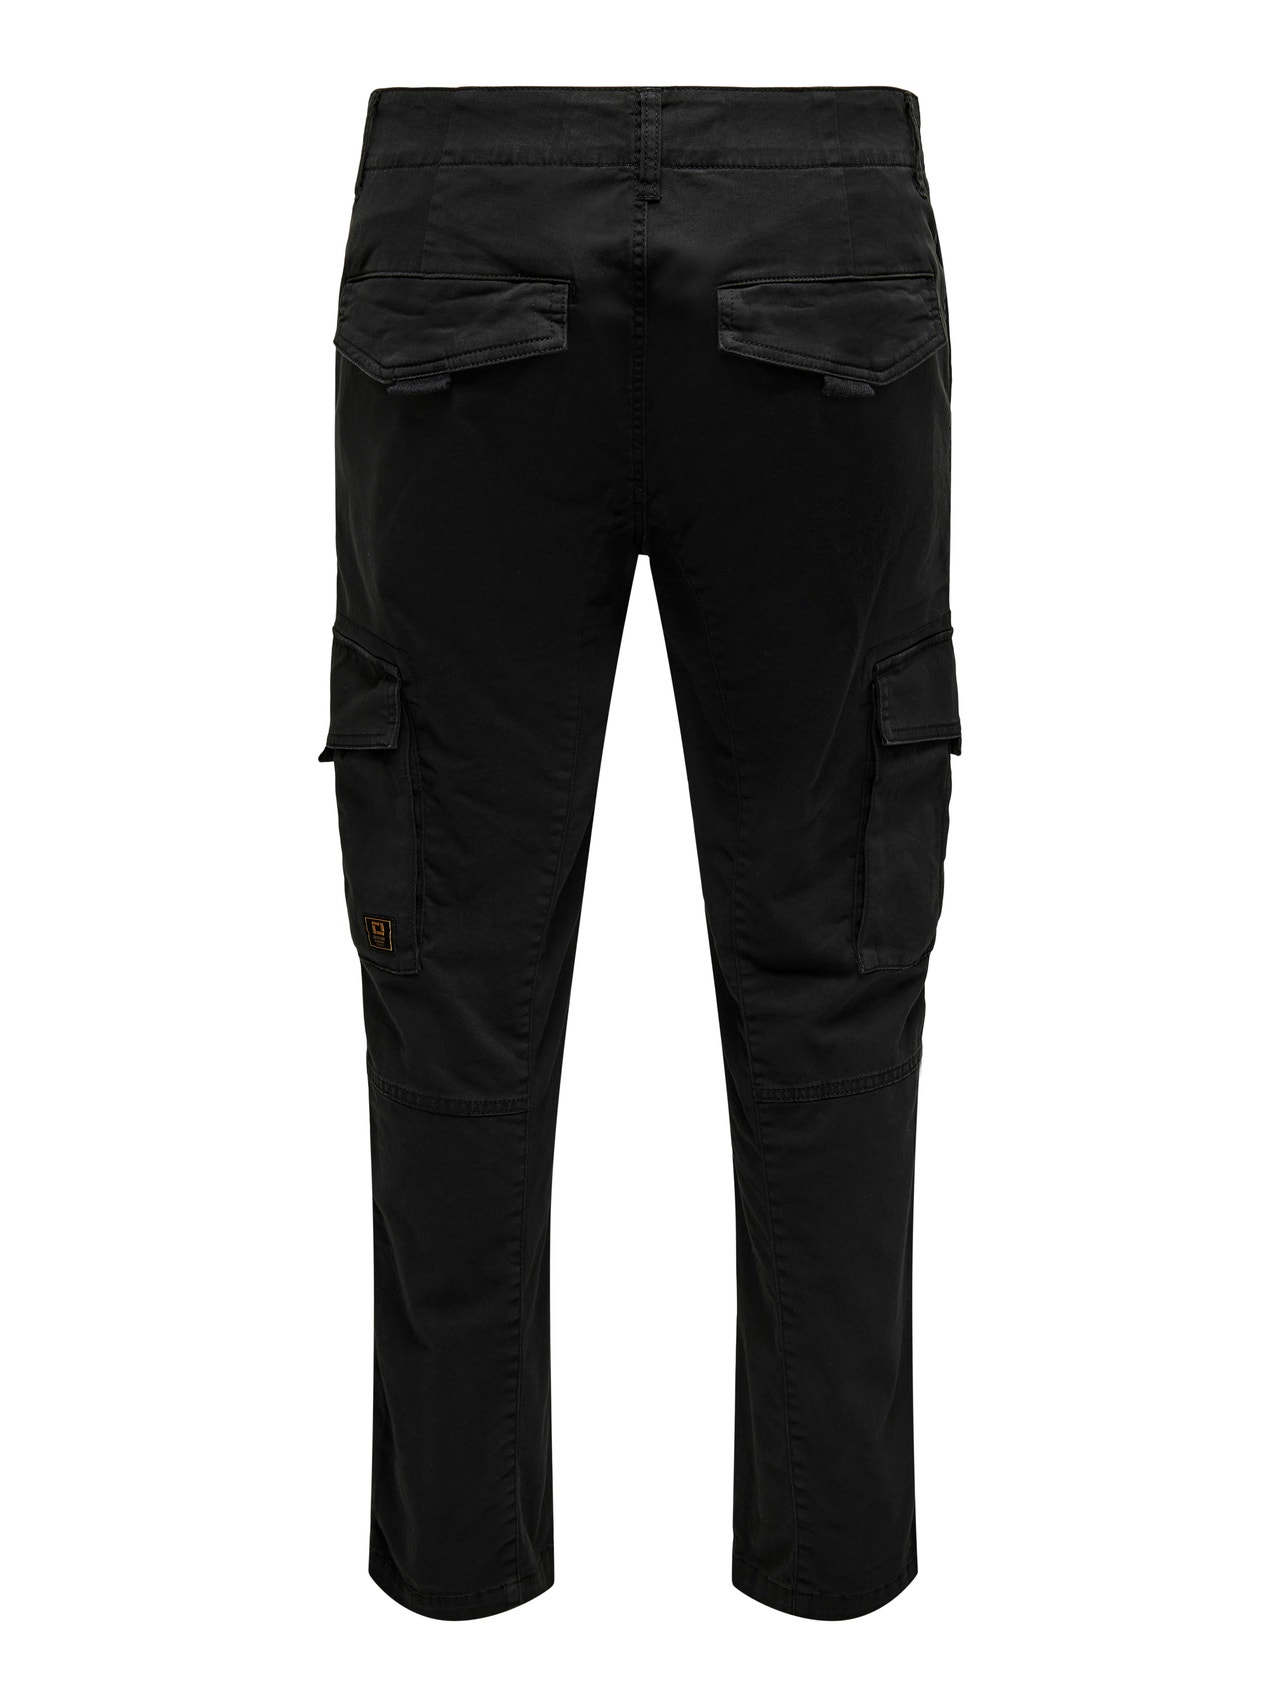 ONLY & SONS Tapered Fit Trousers -Black - 22025431